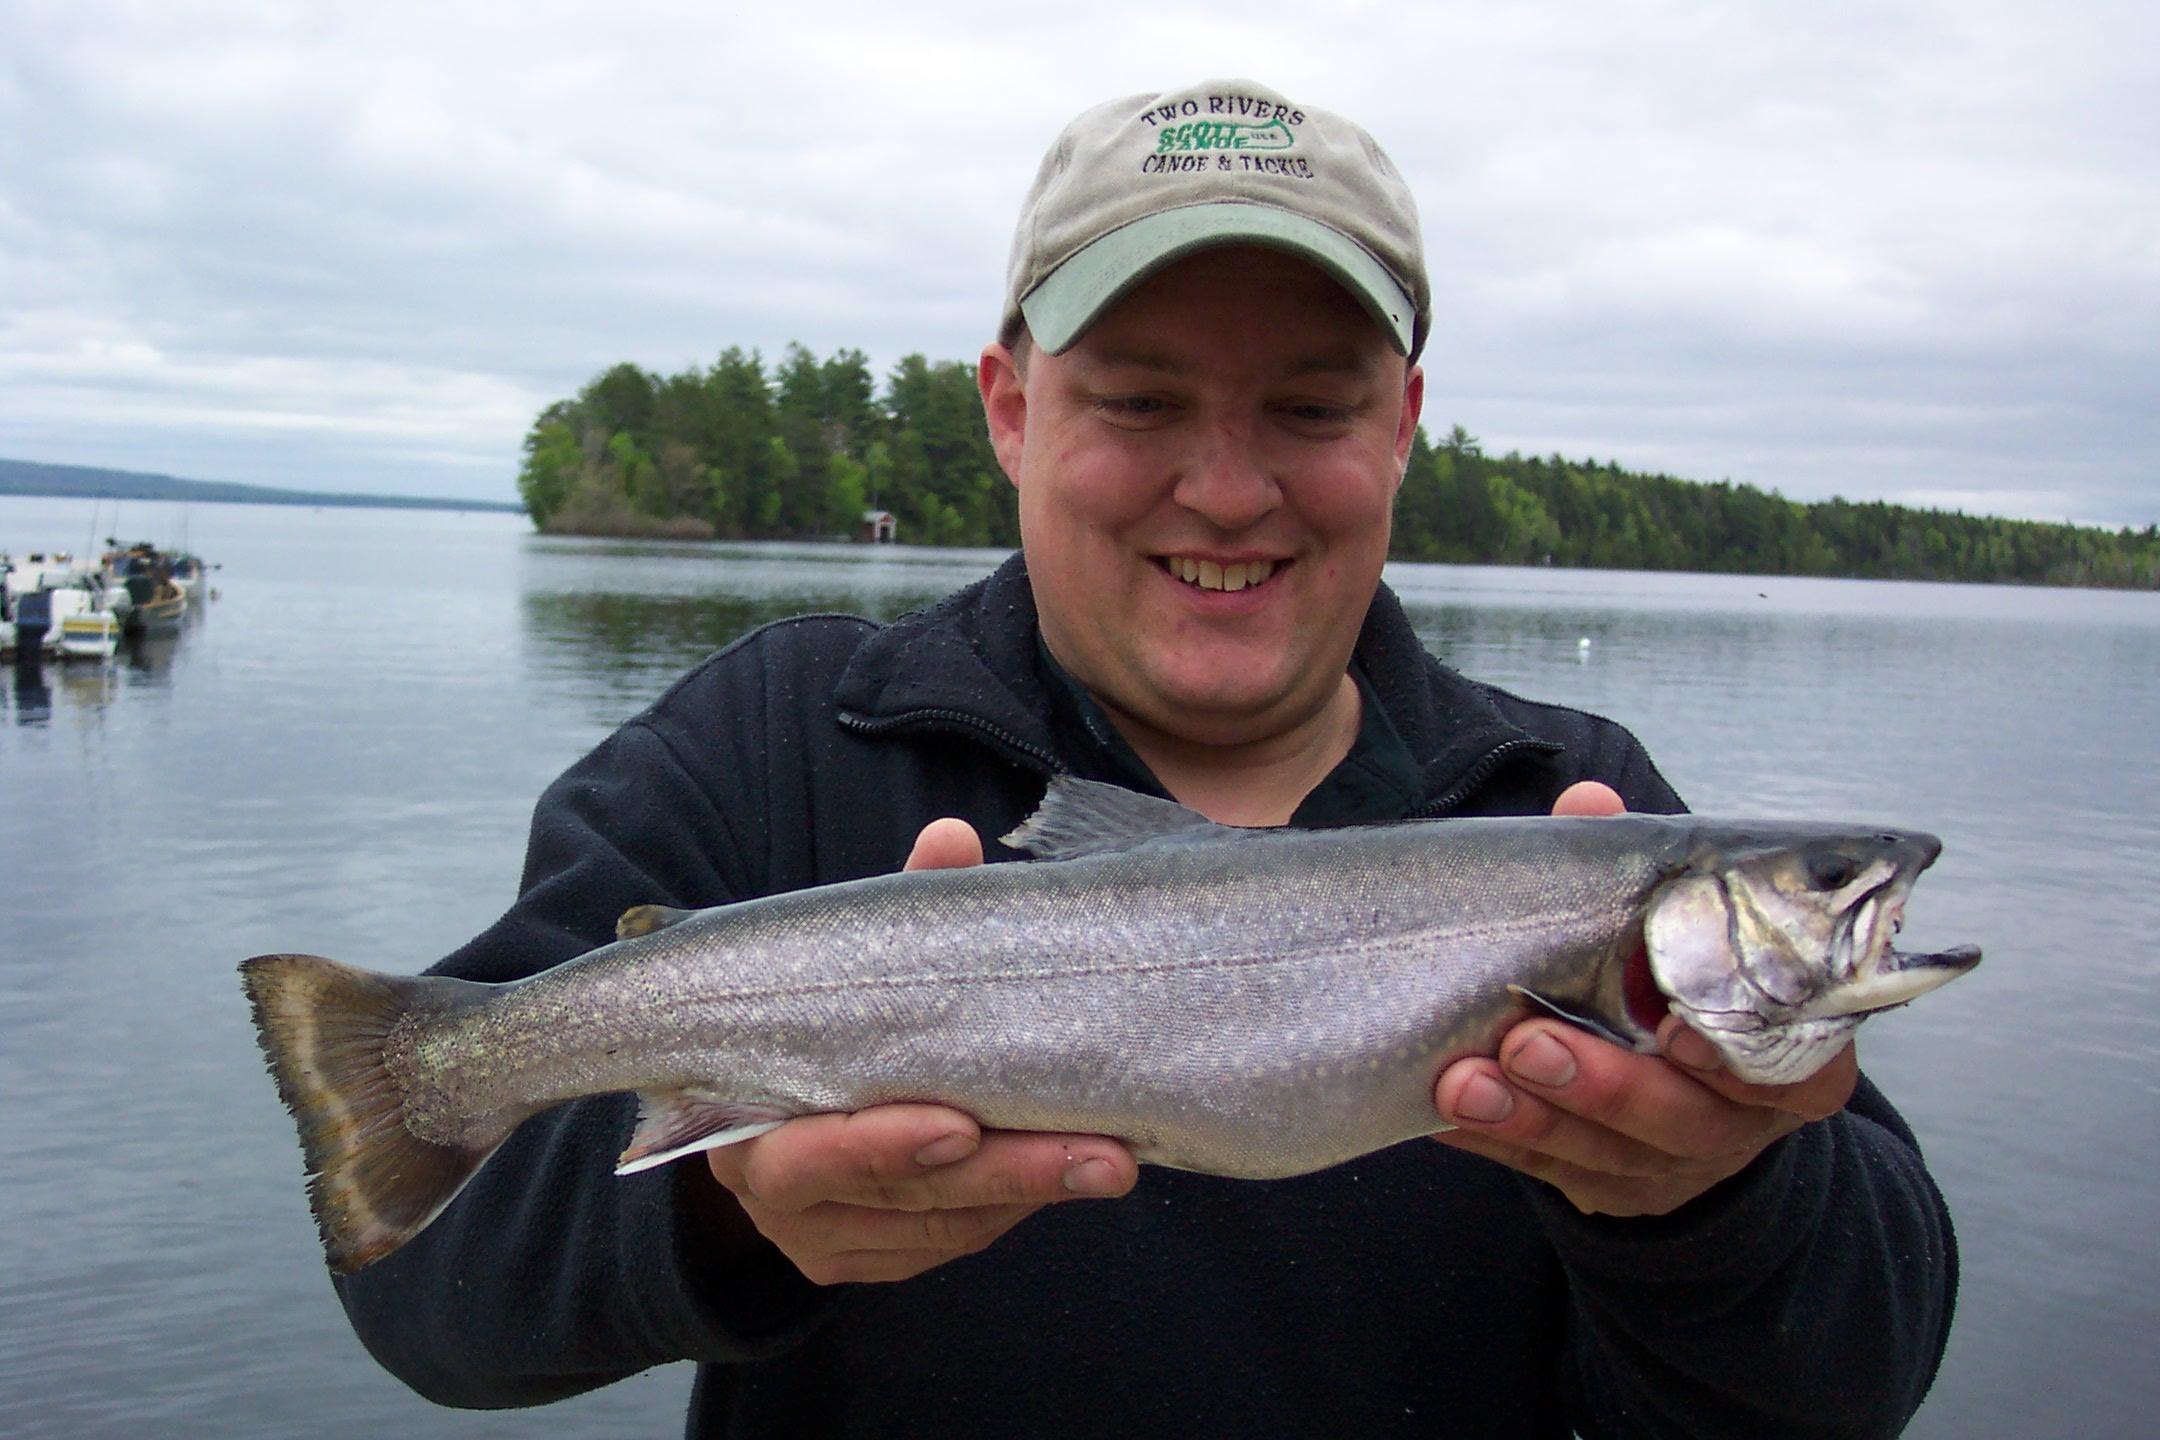 Guy with Brook trout